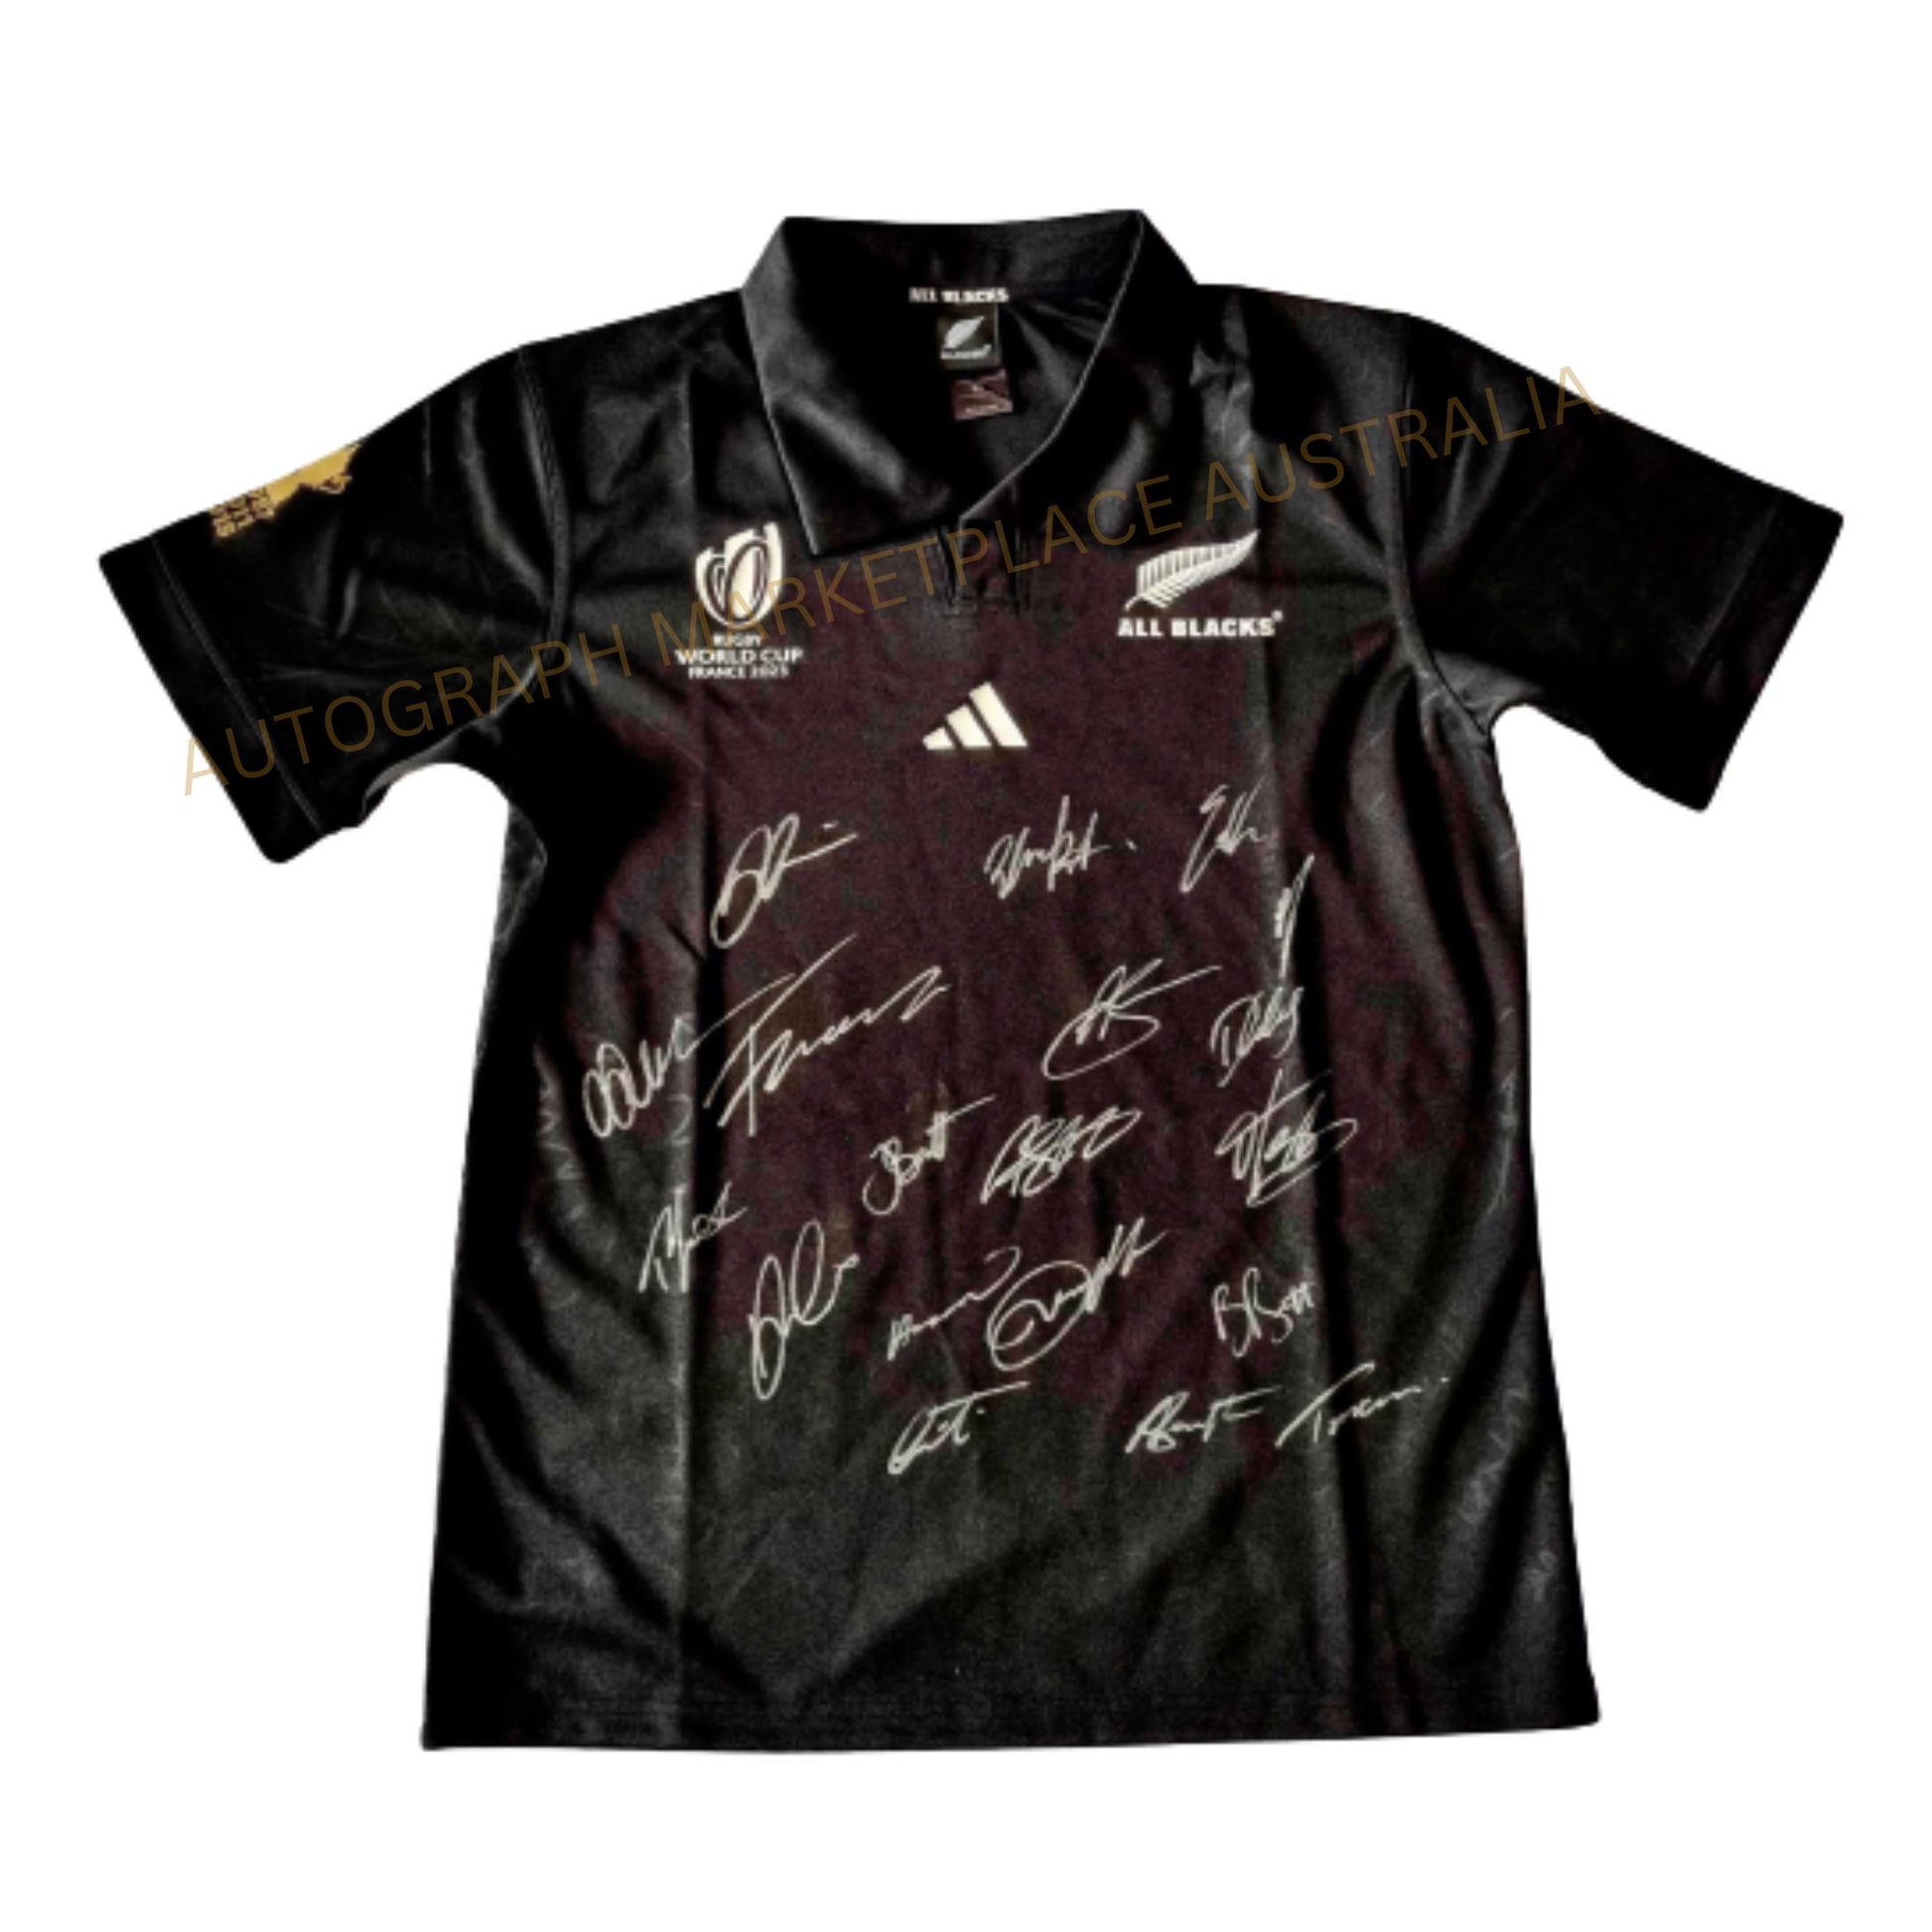 2023 New Zealand All Blacks World Cup Team Signed Rugby Union Jersey